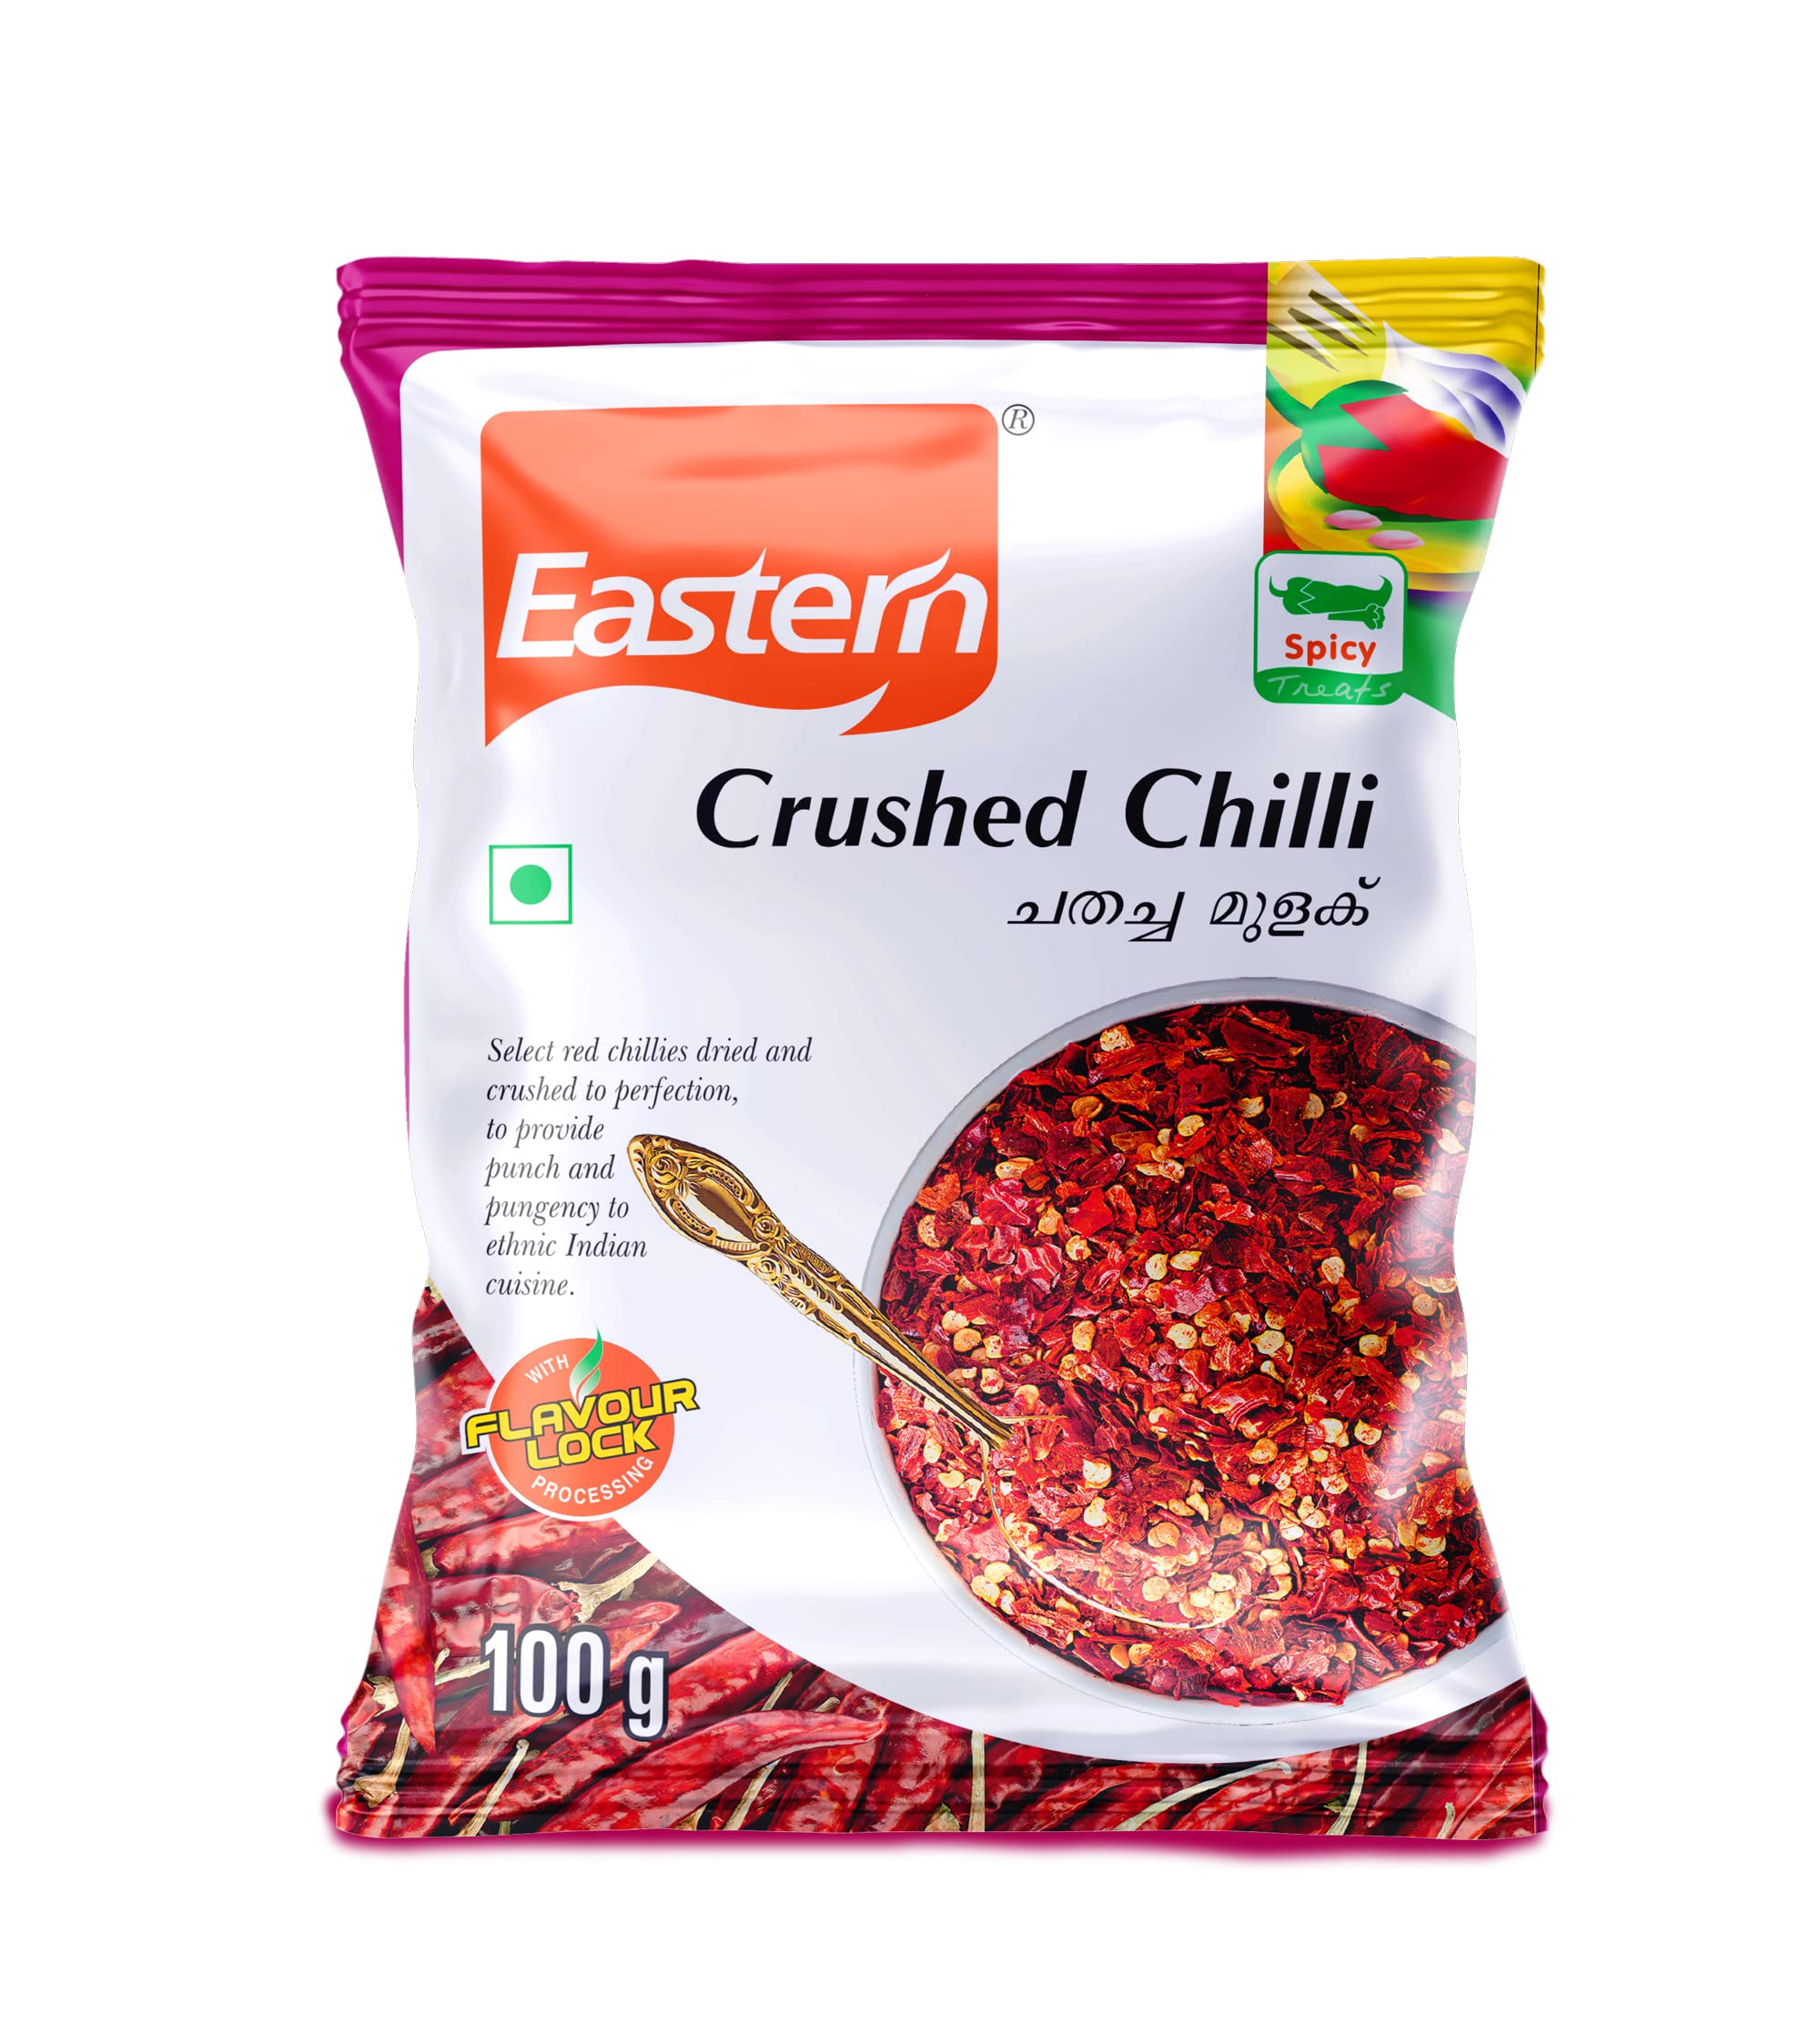 Eastern Crushed Chilly 100g Pouch